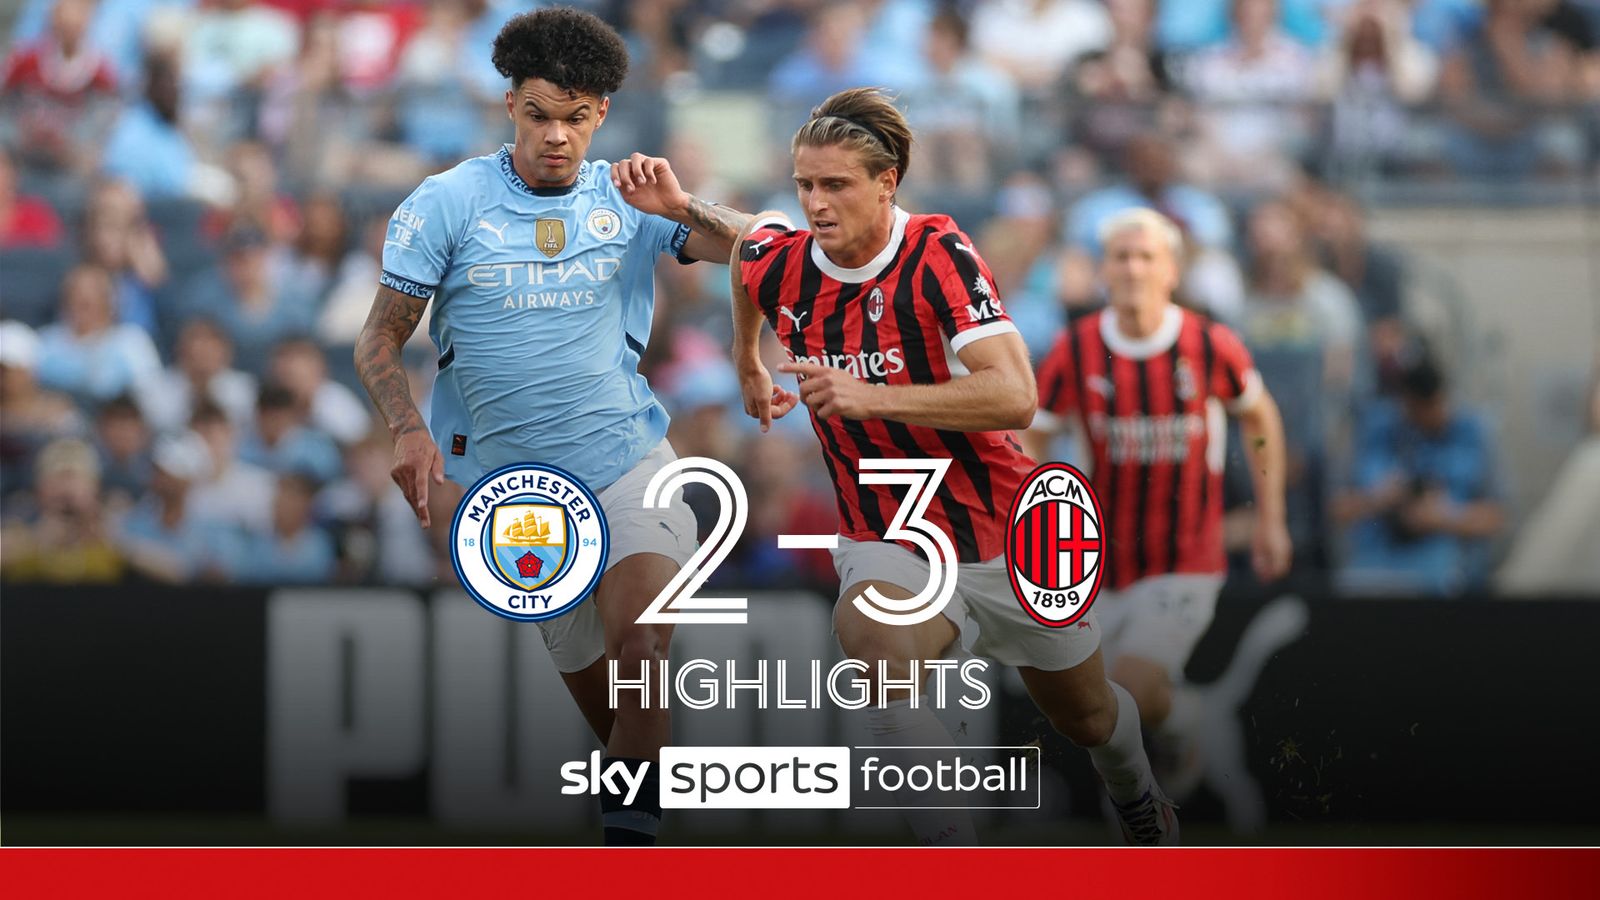 Highlights: Erling Haaland scores again but Manchester City lose once more in defeat to AC Milan